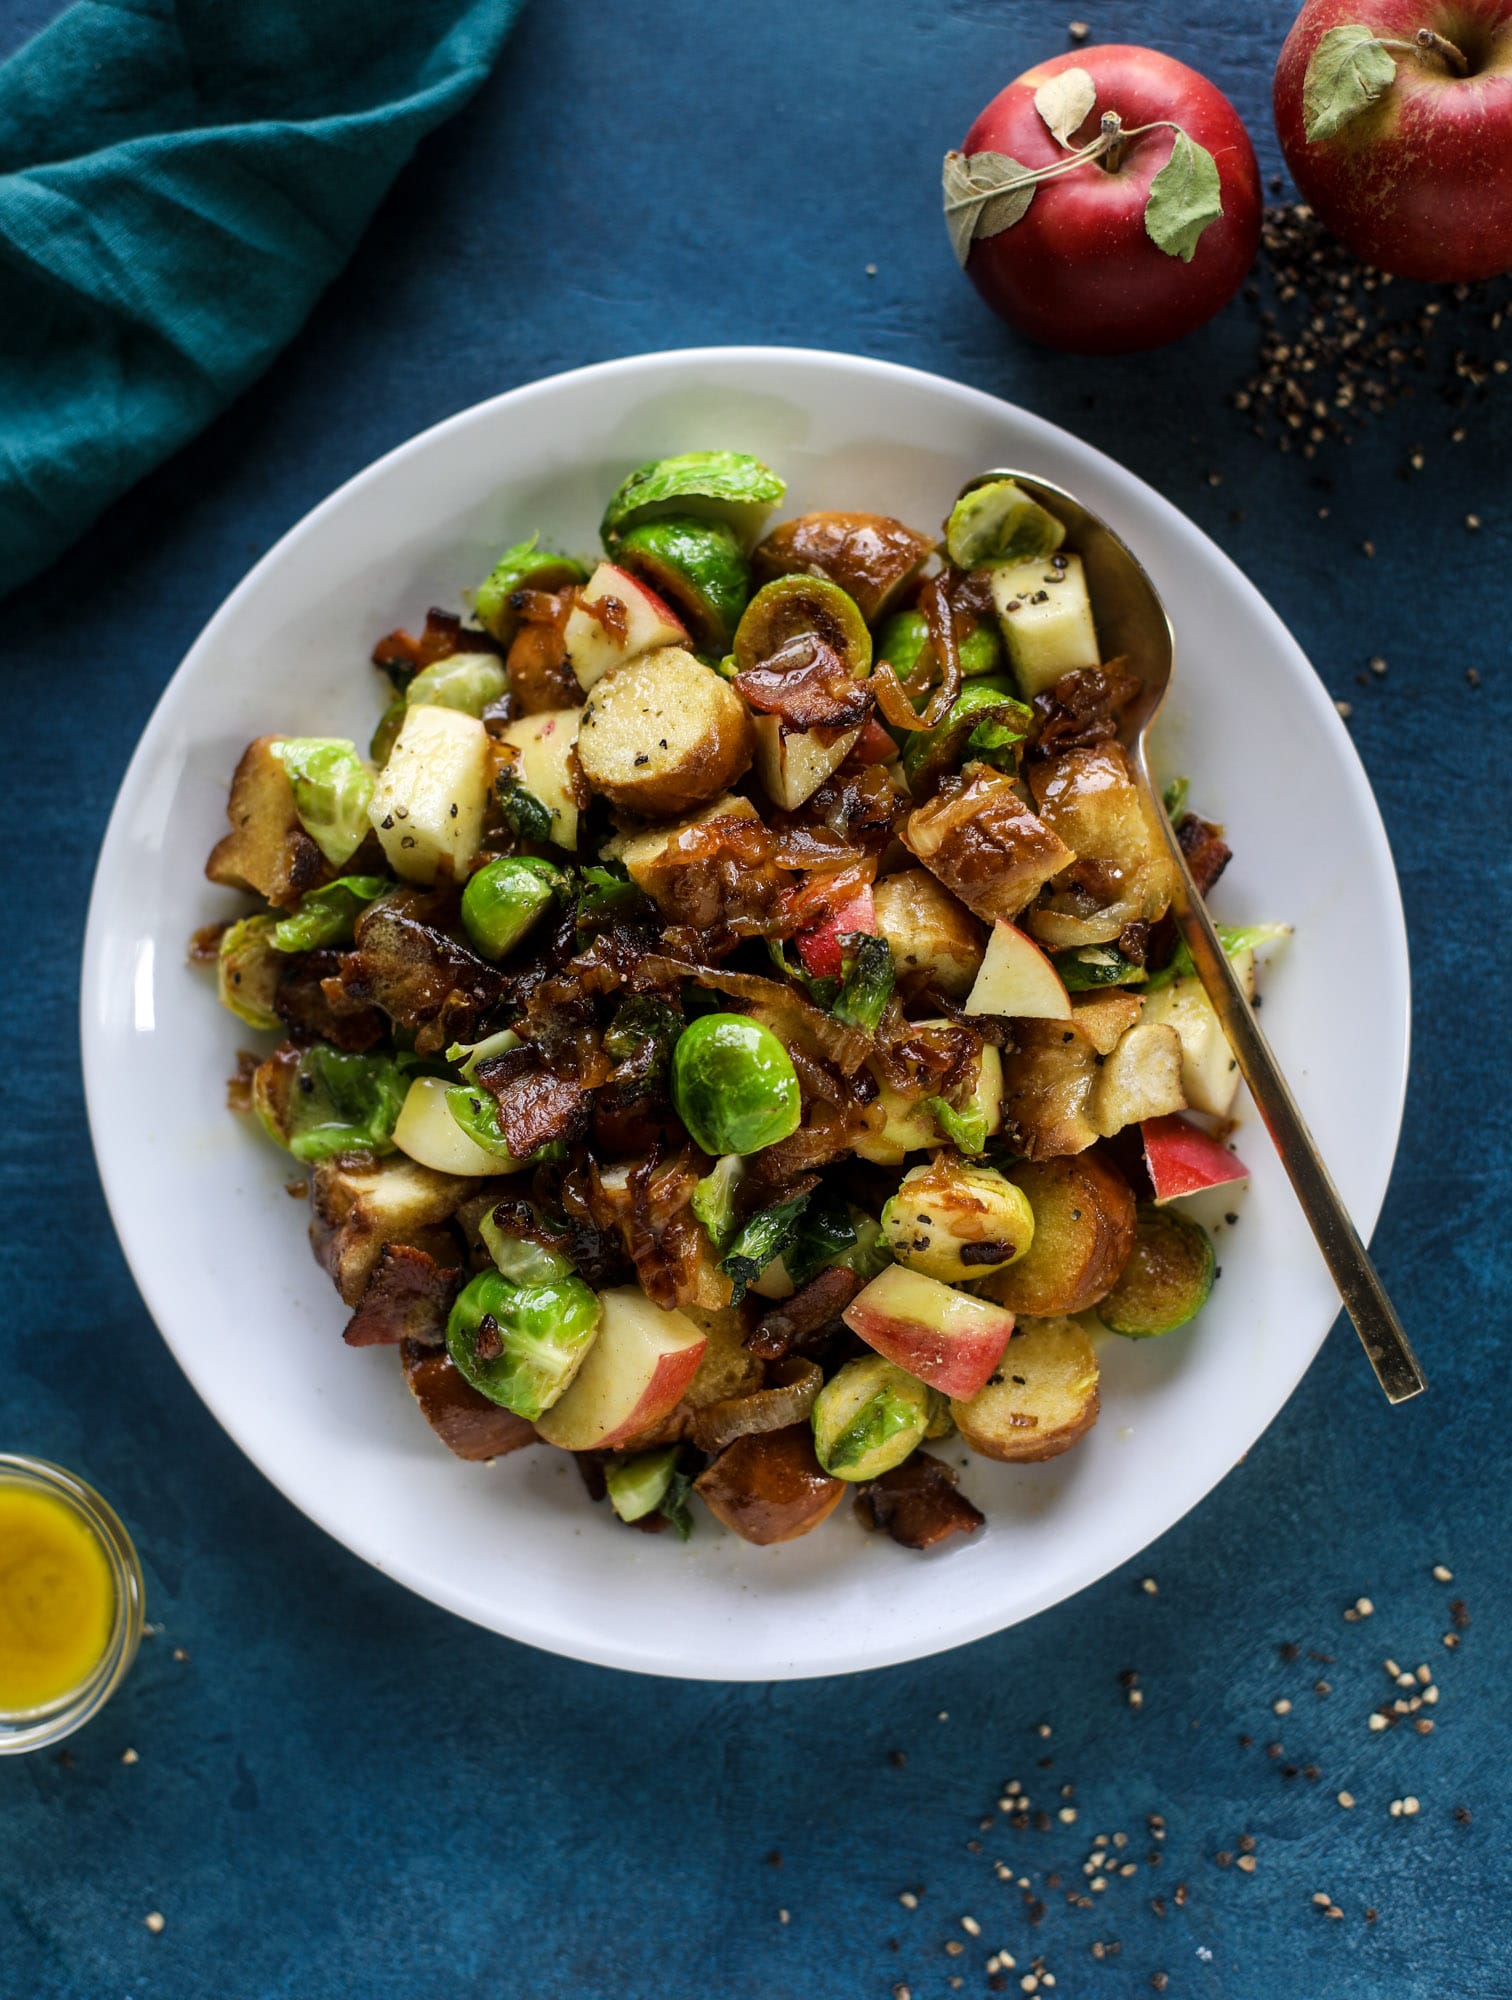 This soft pretzel panzanella with mustard vinaigrette is the best flavor combination for a fall salad there is! Crispy bacon, brussels sprouts, caramelized onion and chopped apple comes together to make for a satisfying delicious autumn salad. I howsweeteats.com #soft #pretzel #panzanella #mustard #apple #brusselssprouts